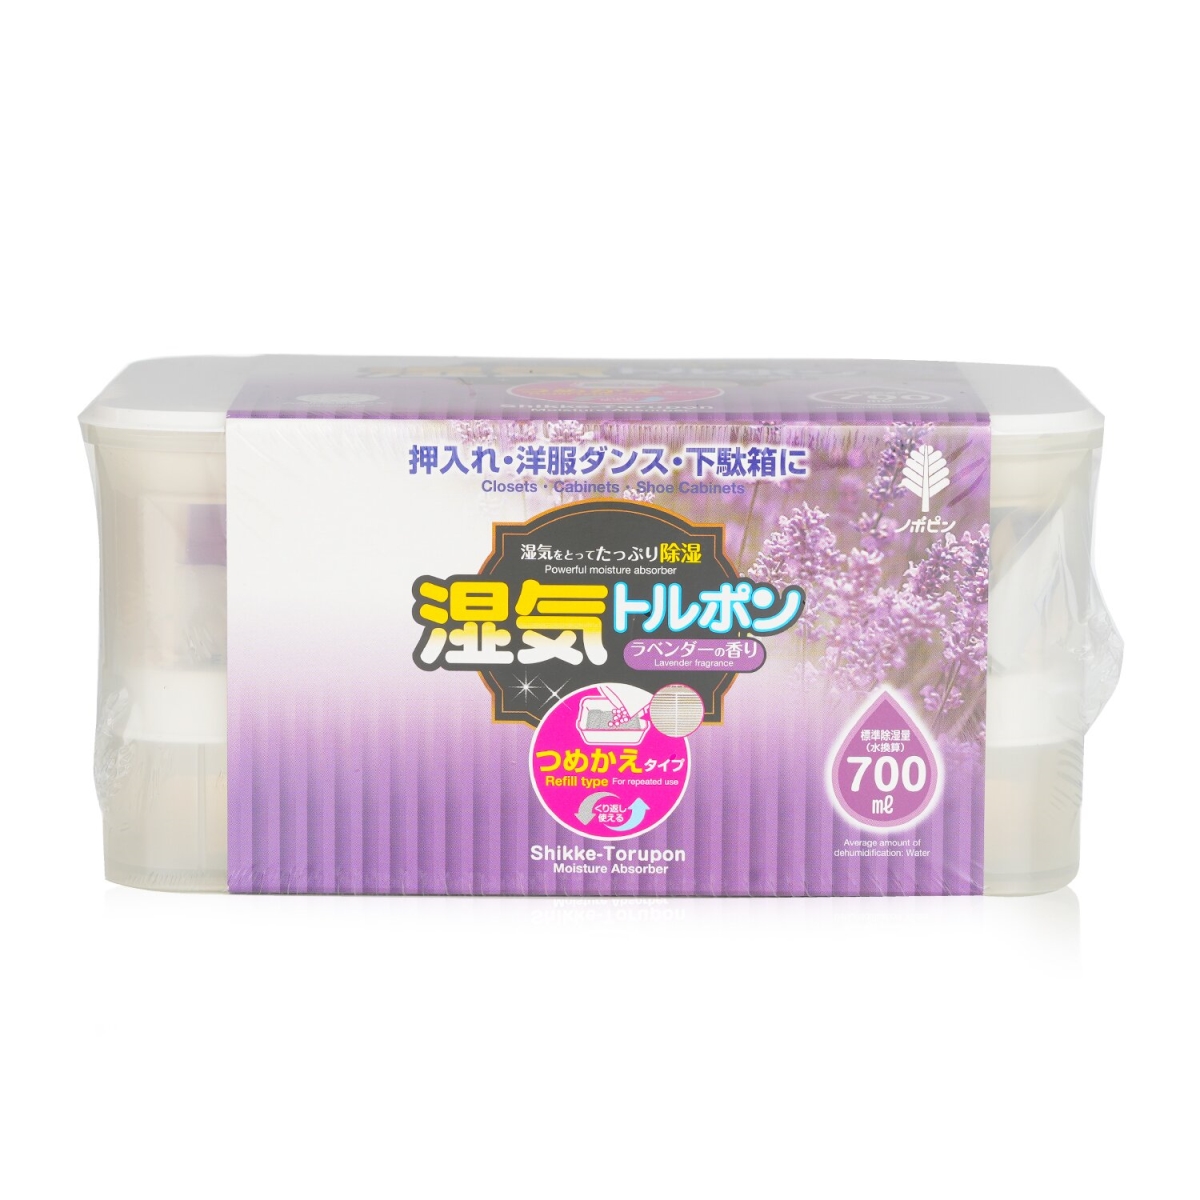 Picture of Kokubo 277696 700 ml Powerful Moisture Absorber for Closets&#44; Cabinets & Shoe Cabinets - Lavender Fragrance